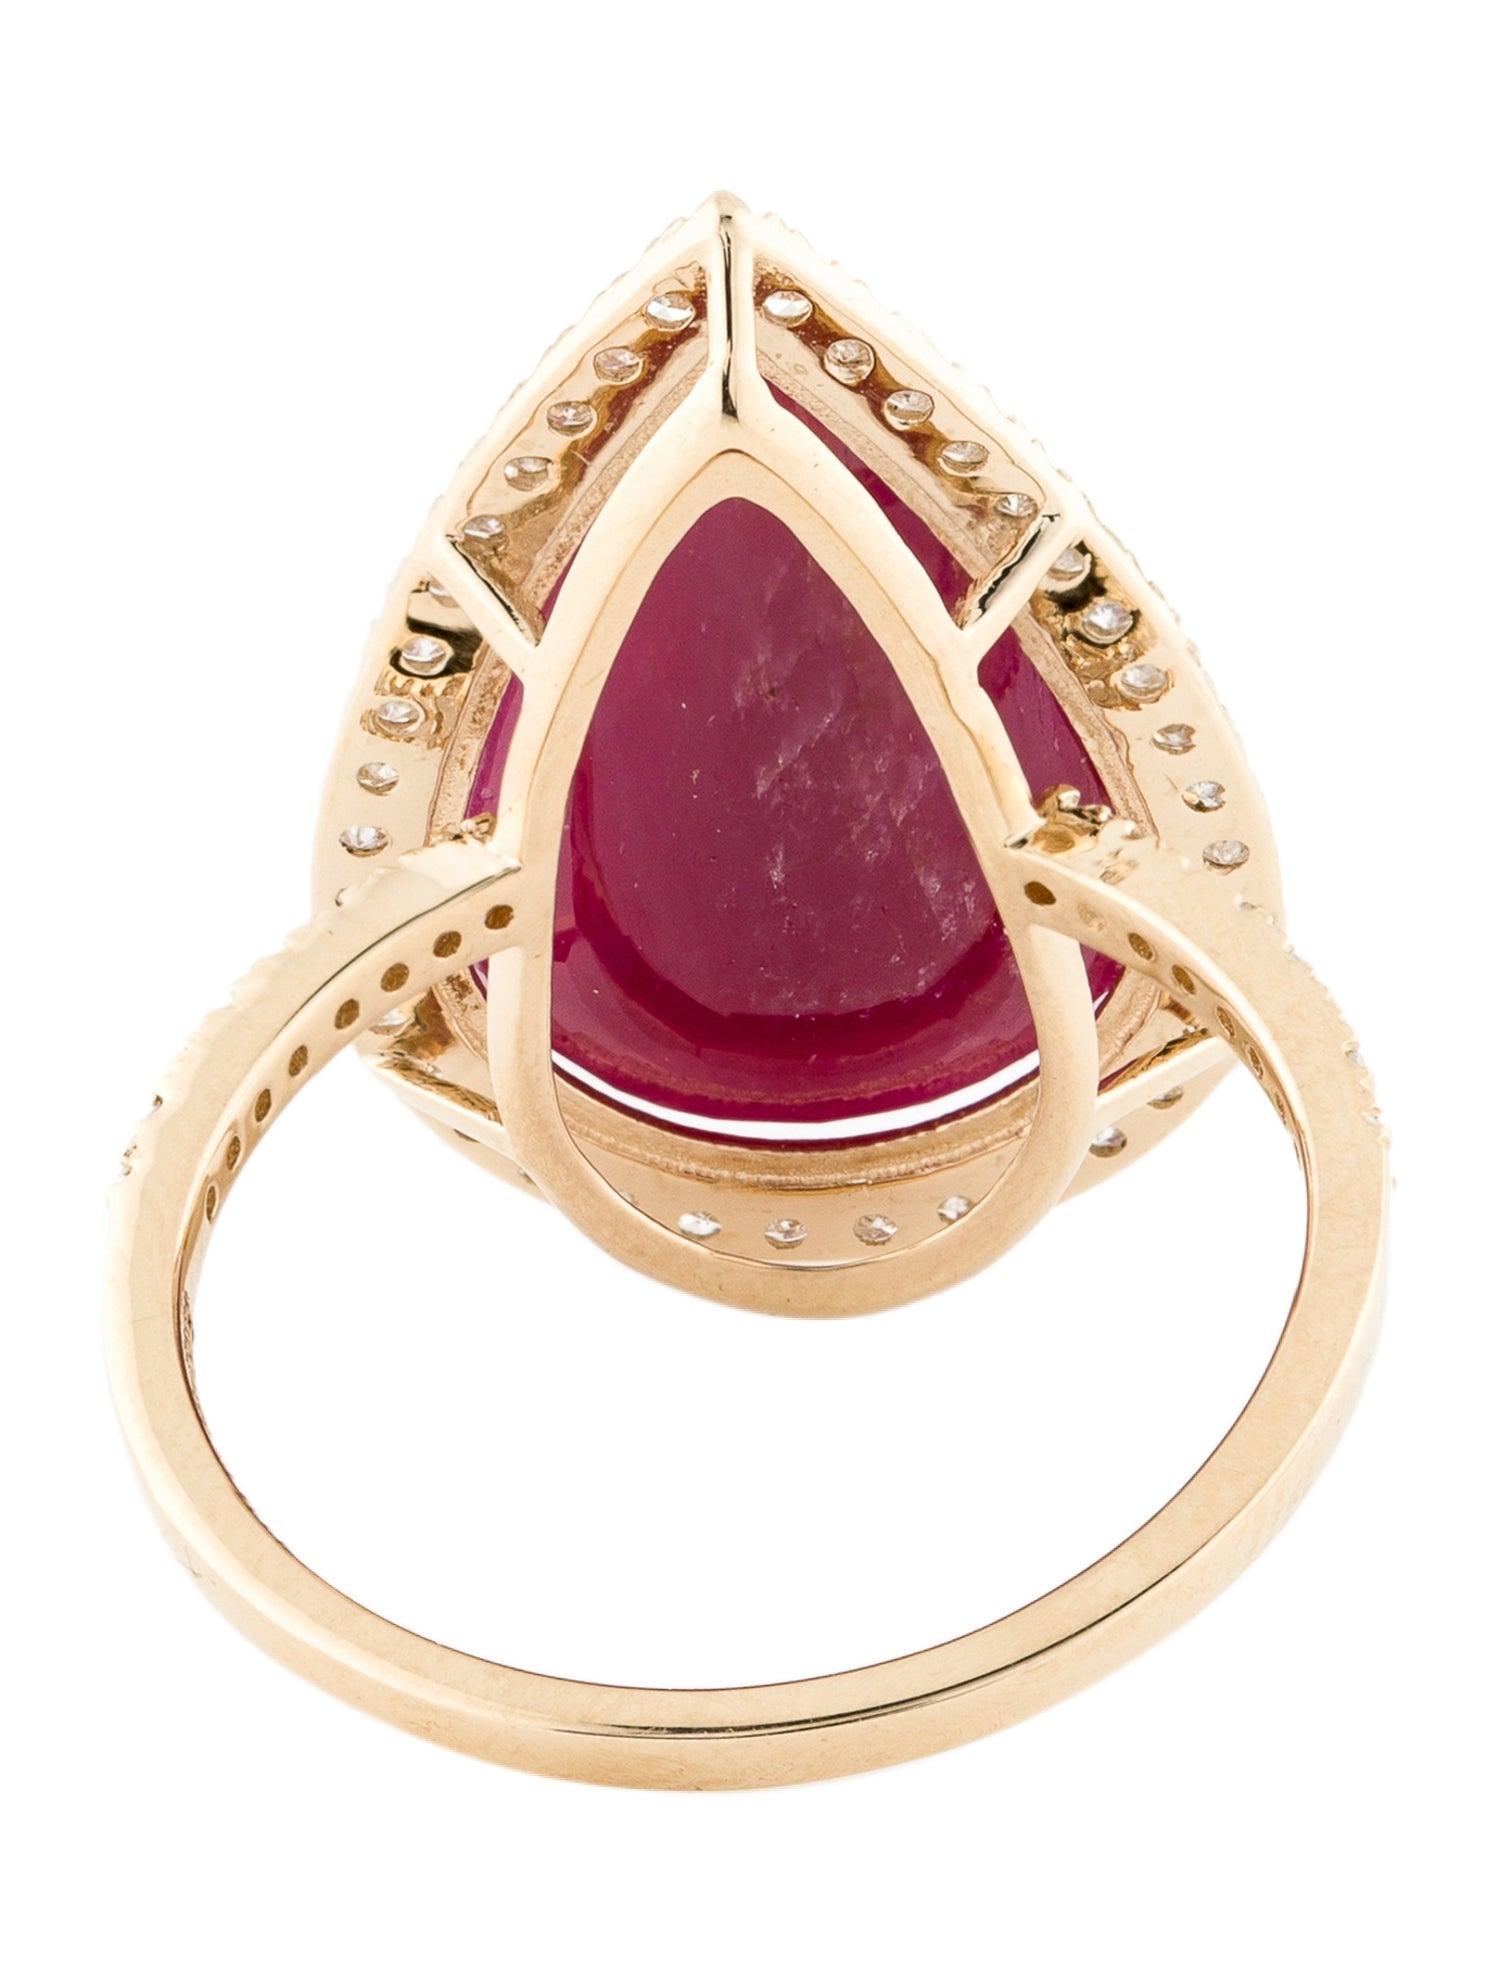 Brilliant Cut Dazzling 14K Gold 6.16ct Ruby & Diamond Cocktail Ring - Size 7.5 - Fine Jewelry For Sale